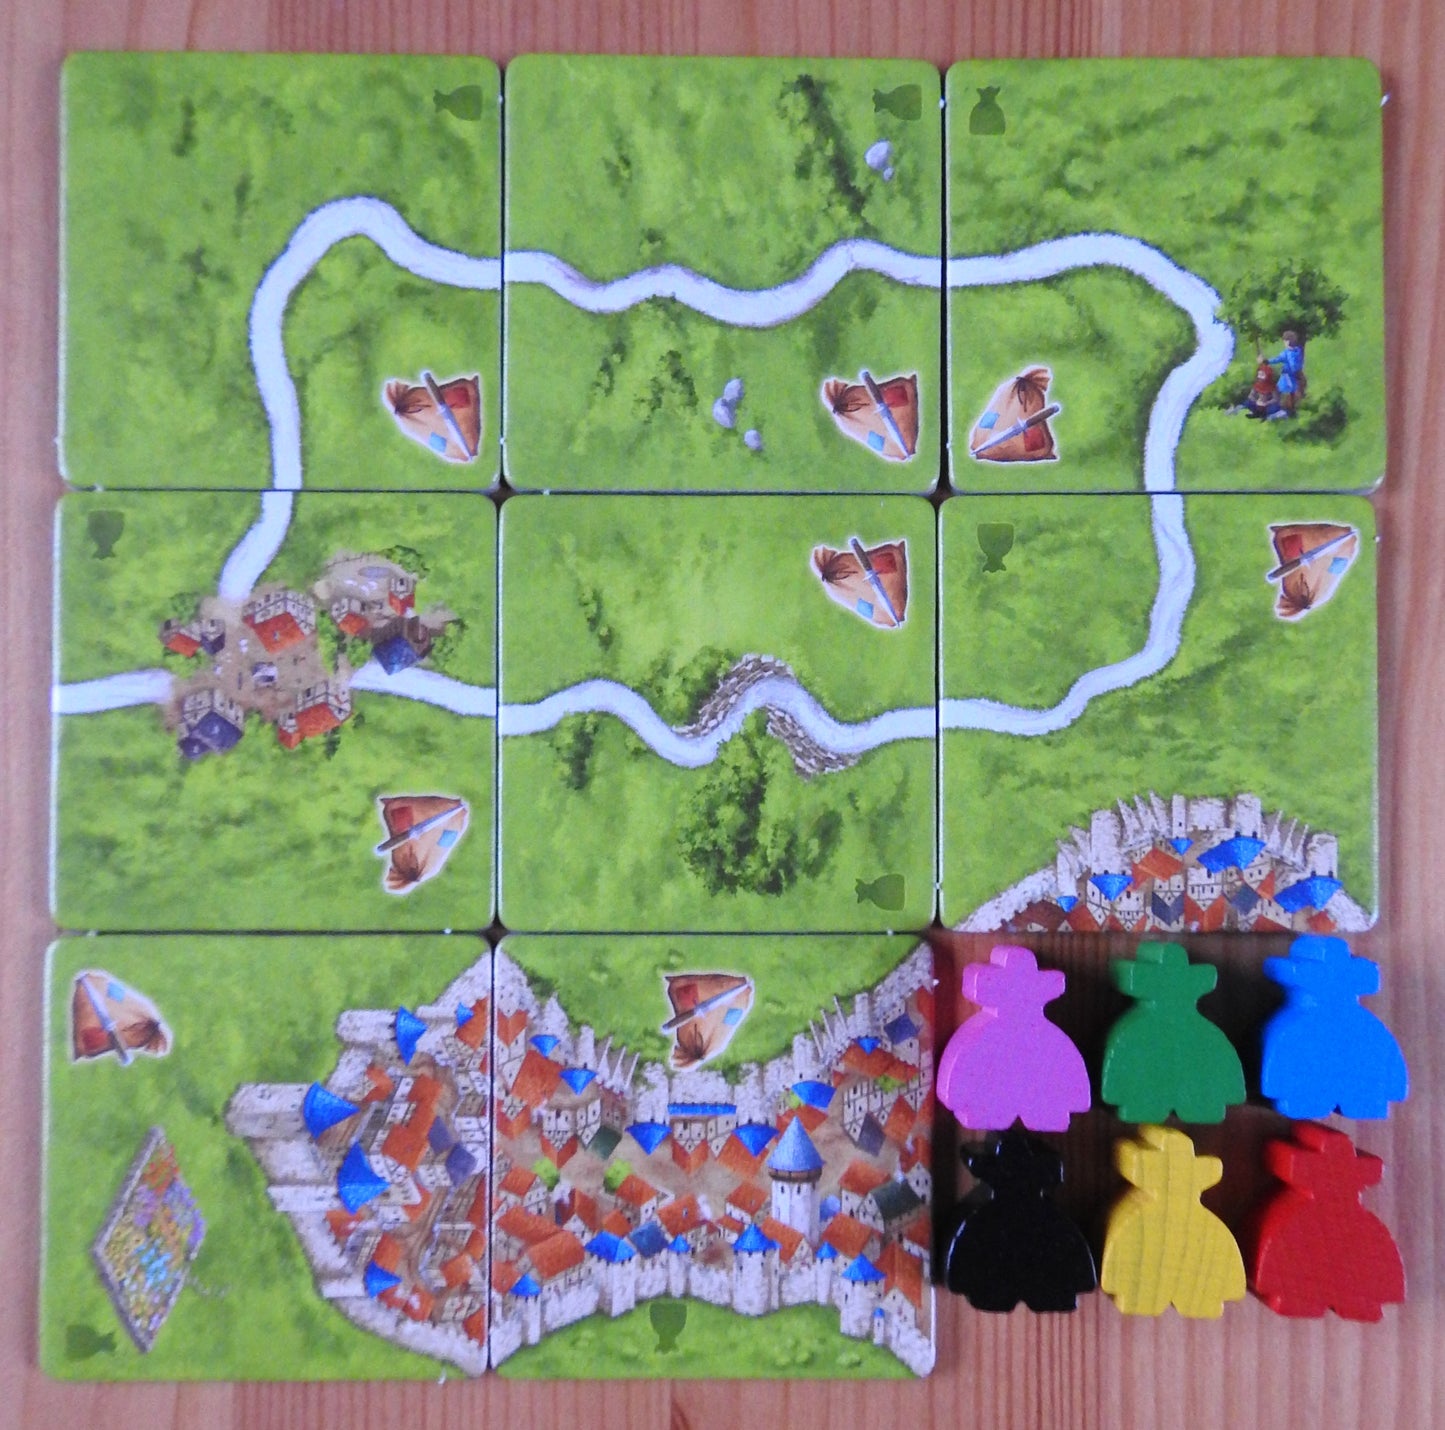 View of all the landscape tiles and meeple figures included in this Carcassonne Robbers expansion.